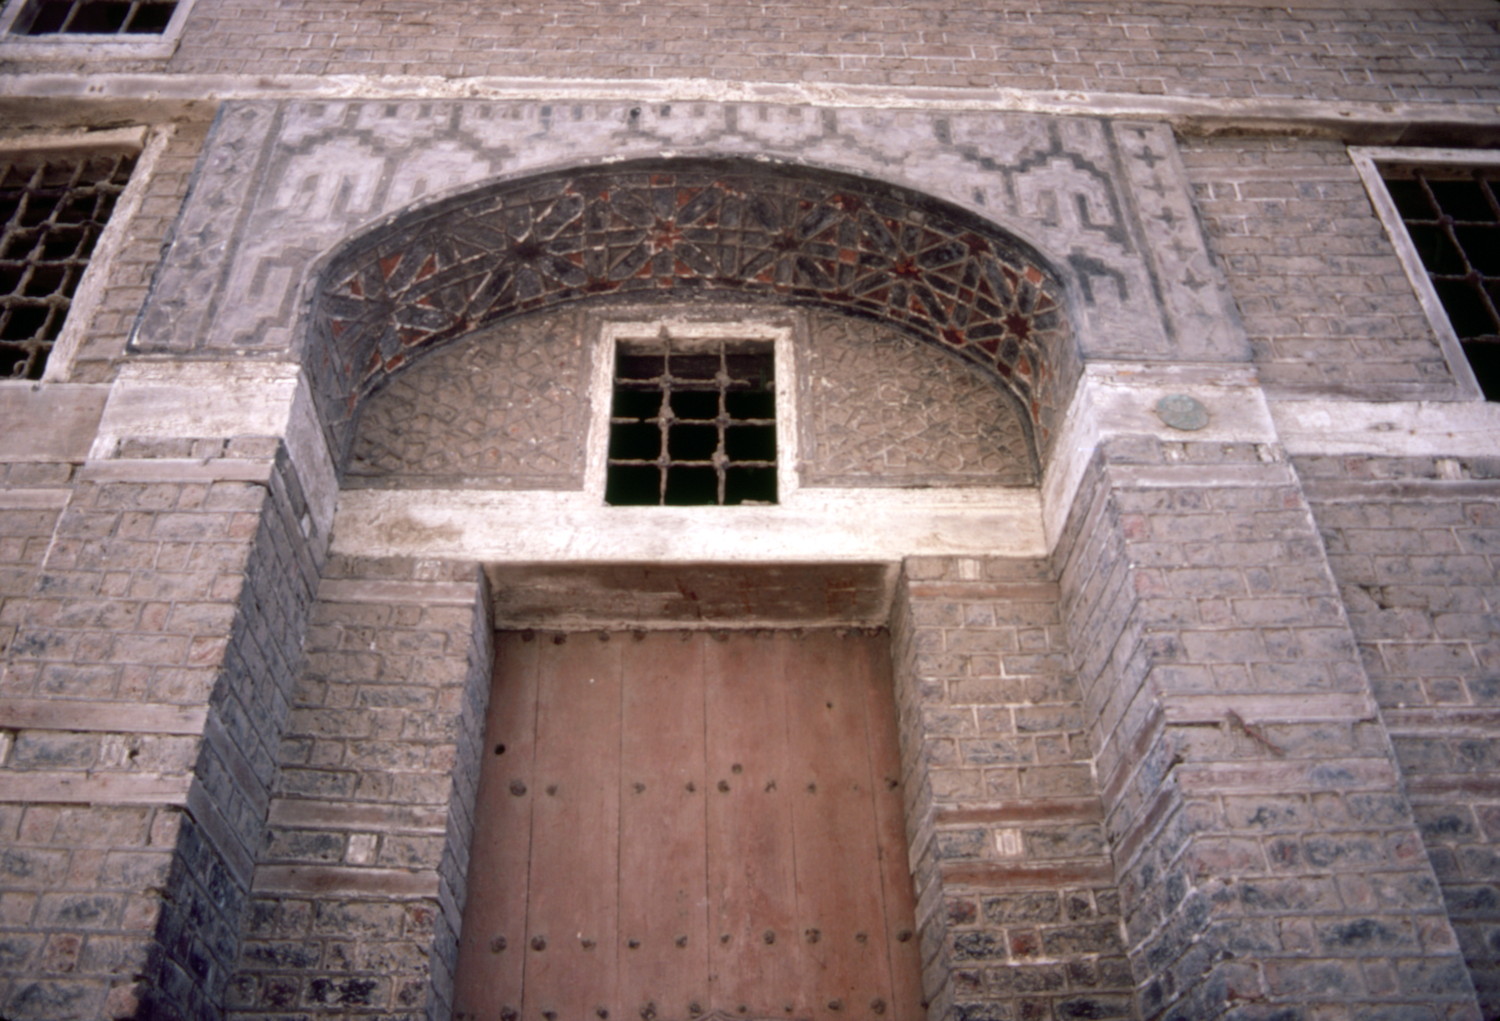 Amasyali House (1808/1223 AH), view of main entry door on east facade